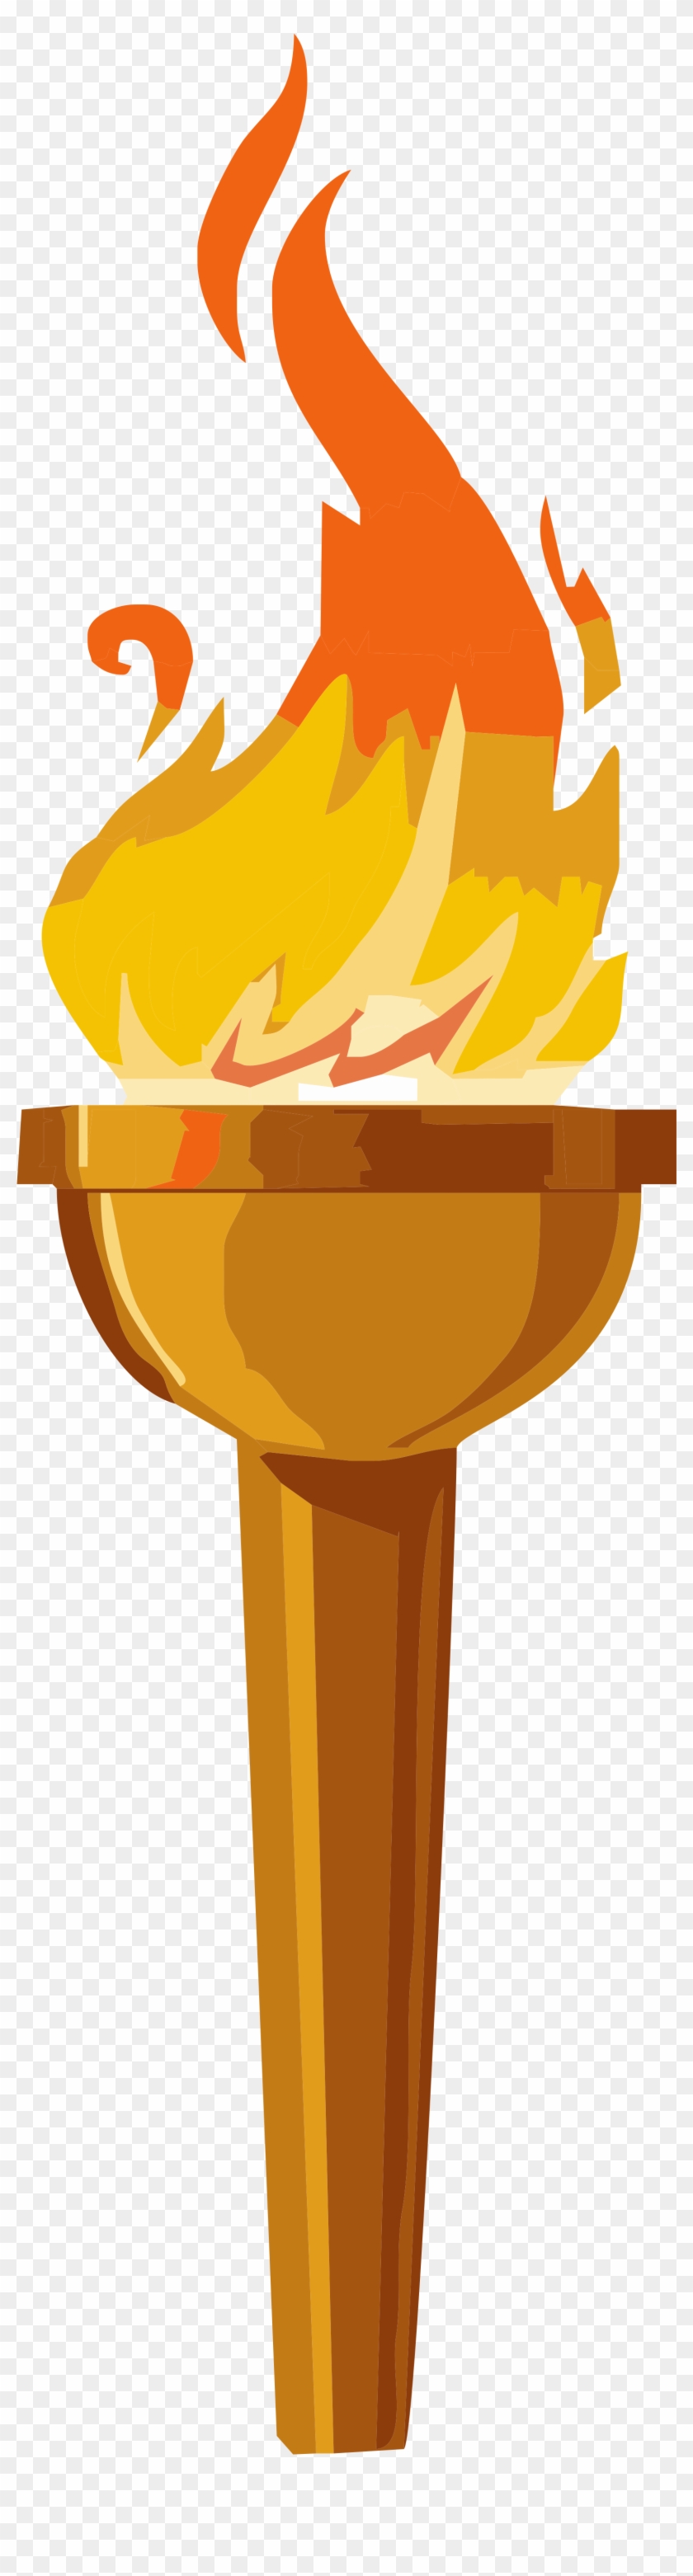 Flashlight Clipart Phone - Olympic Torch Clip Art - Png Download